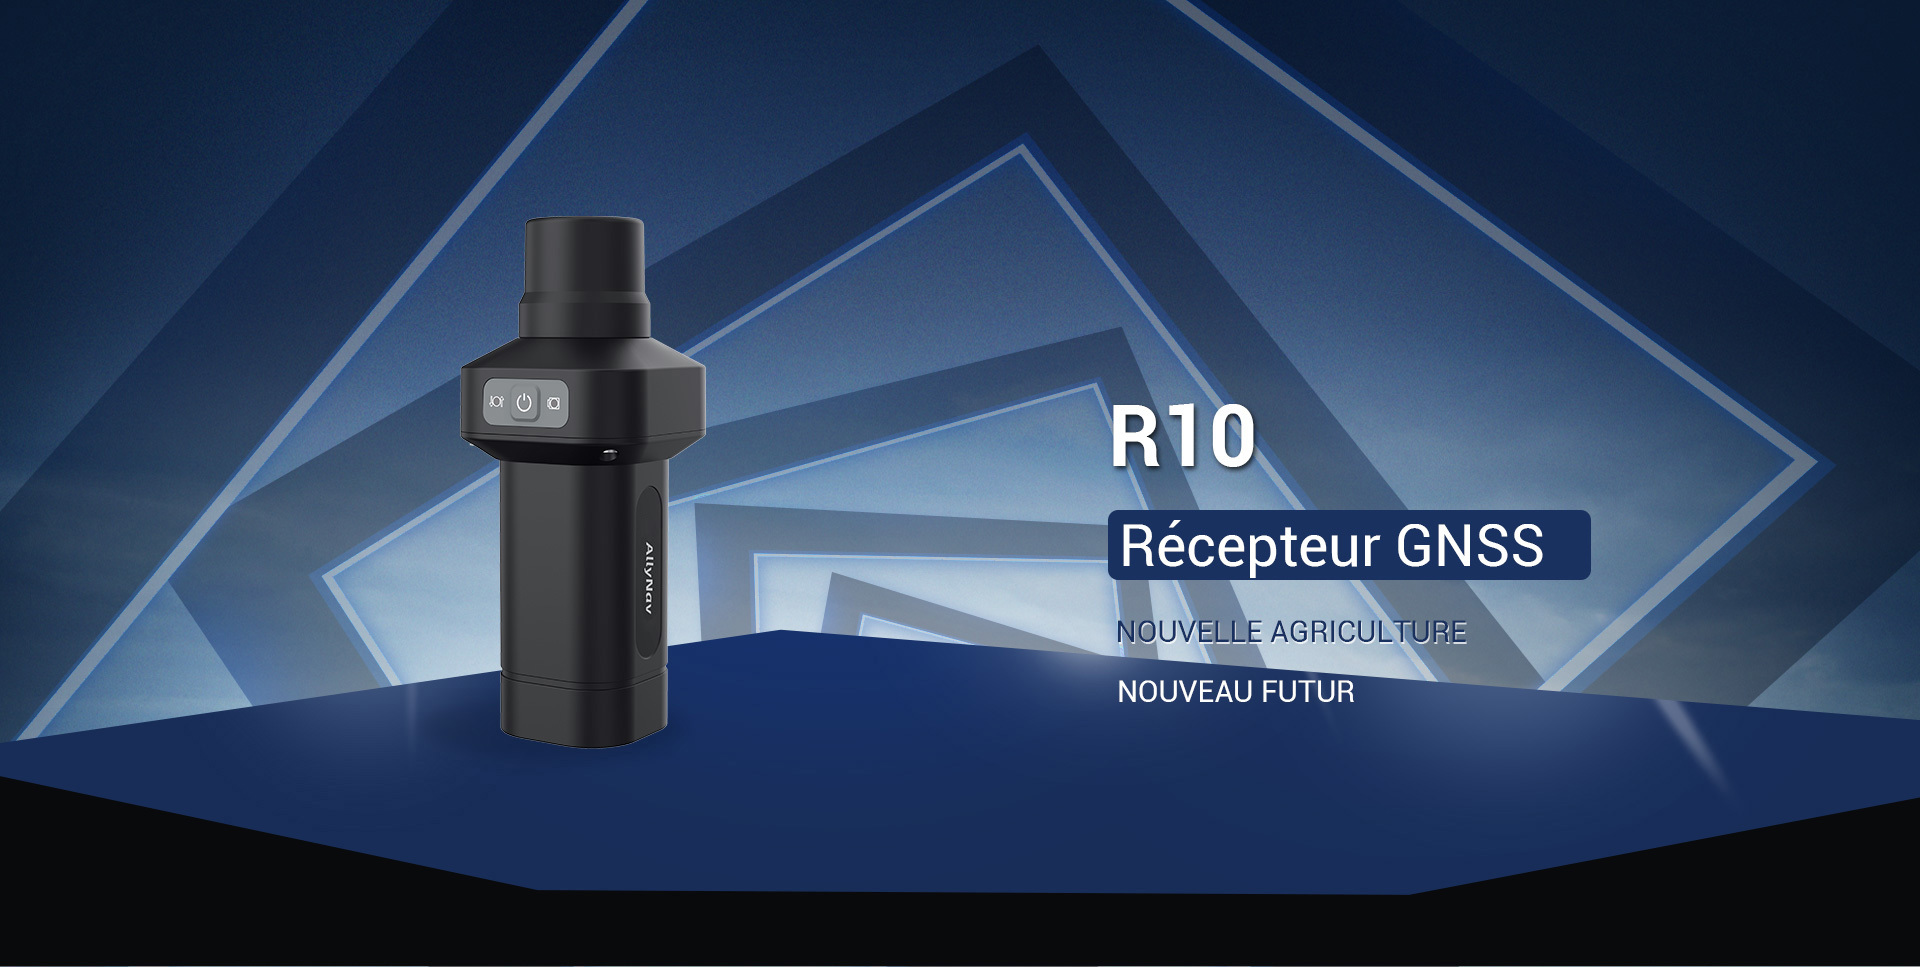 R10 GNSS receiver